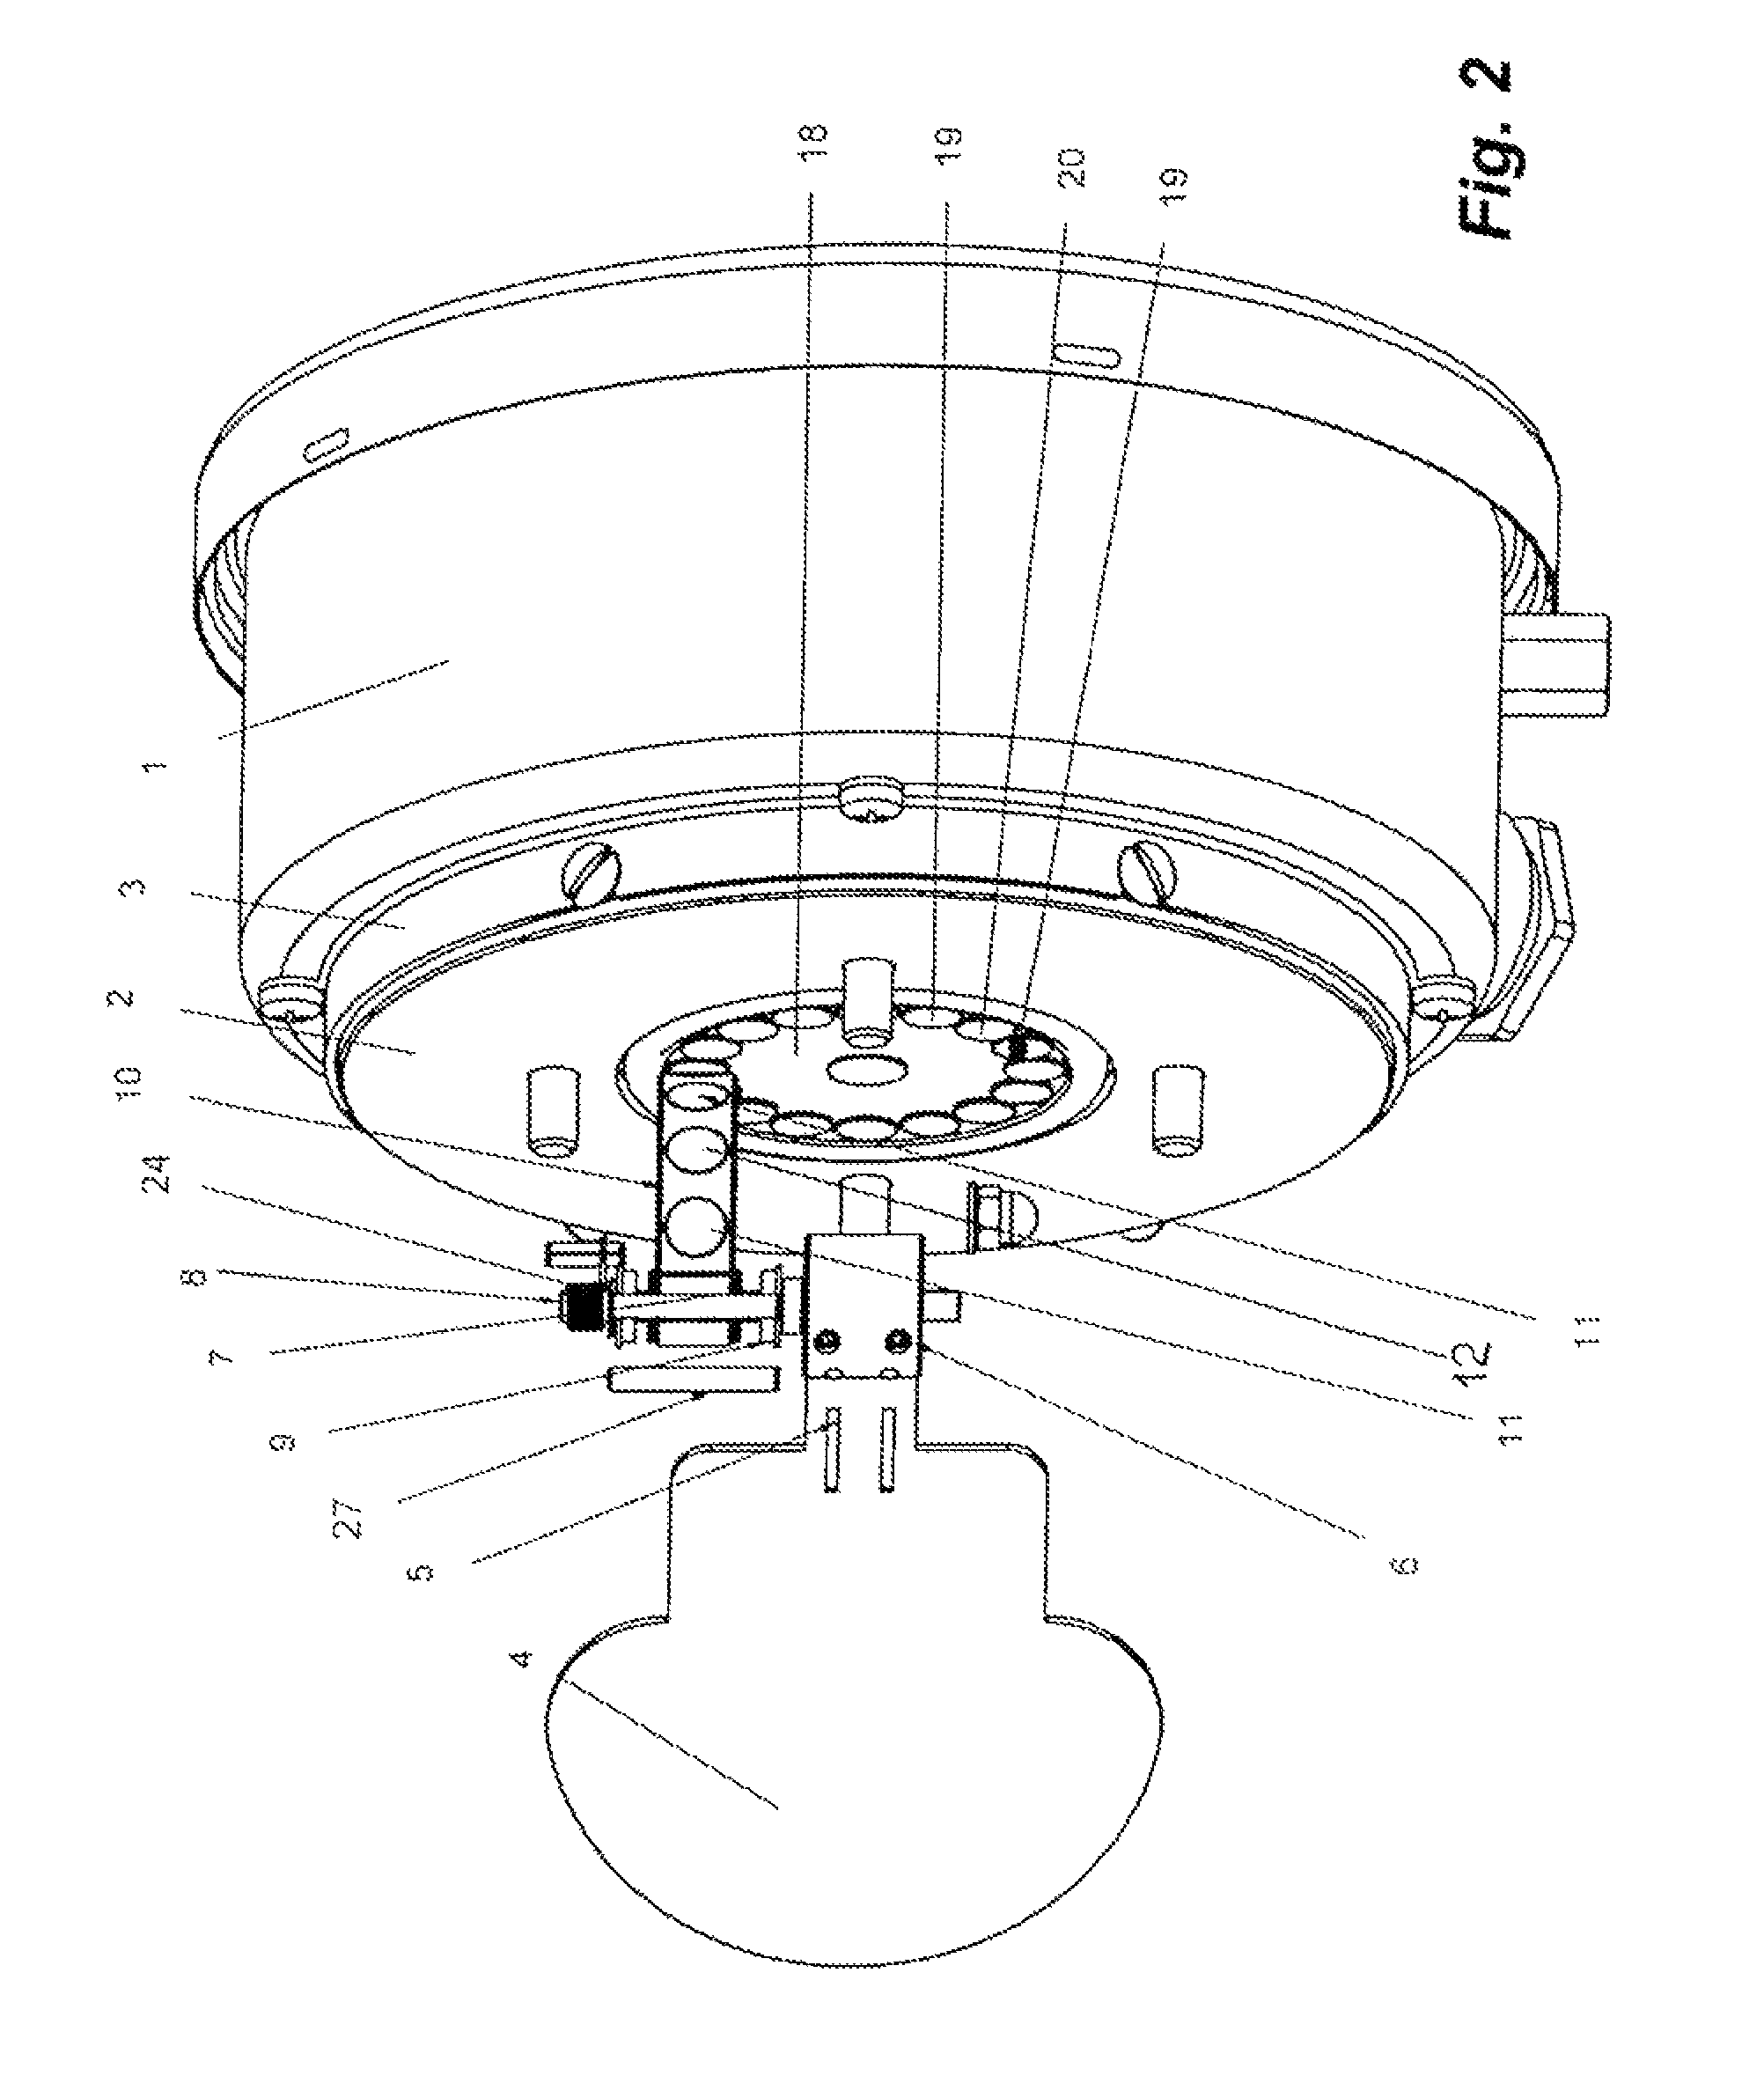 Paddle-type flowmeter with magnetic coupling